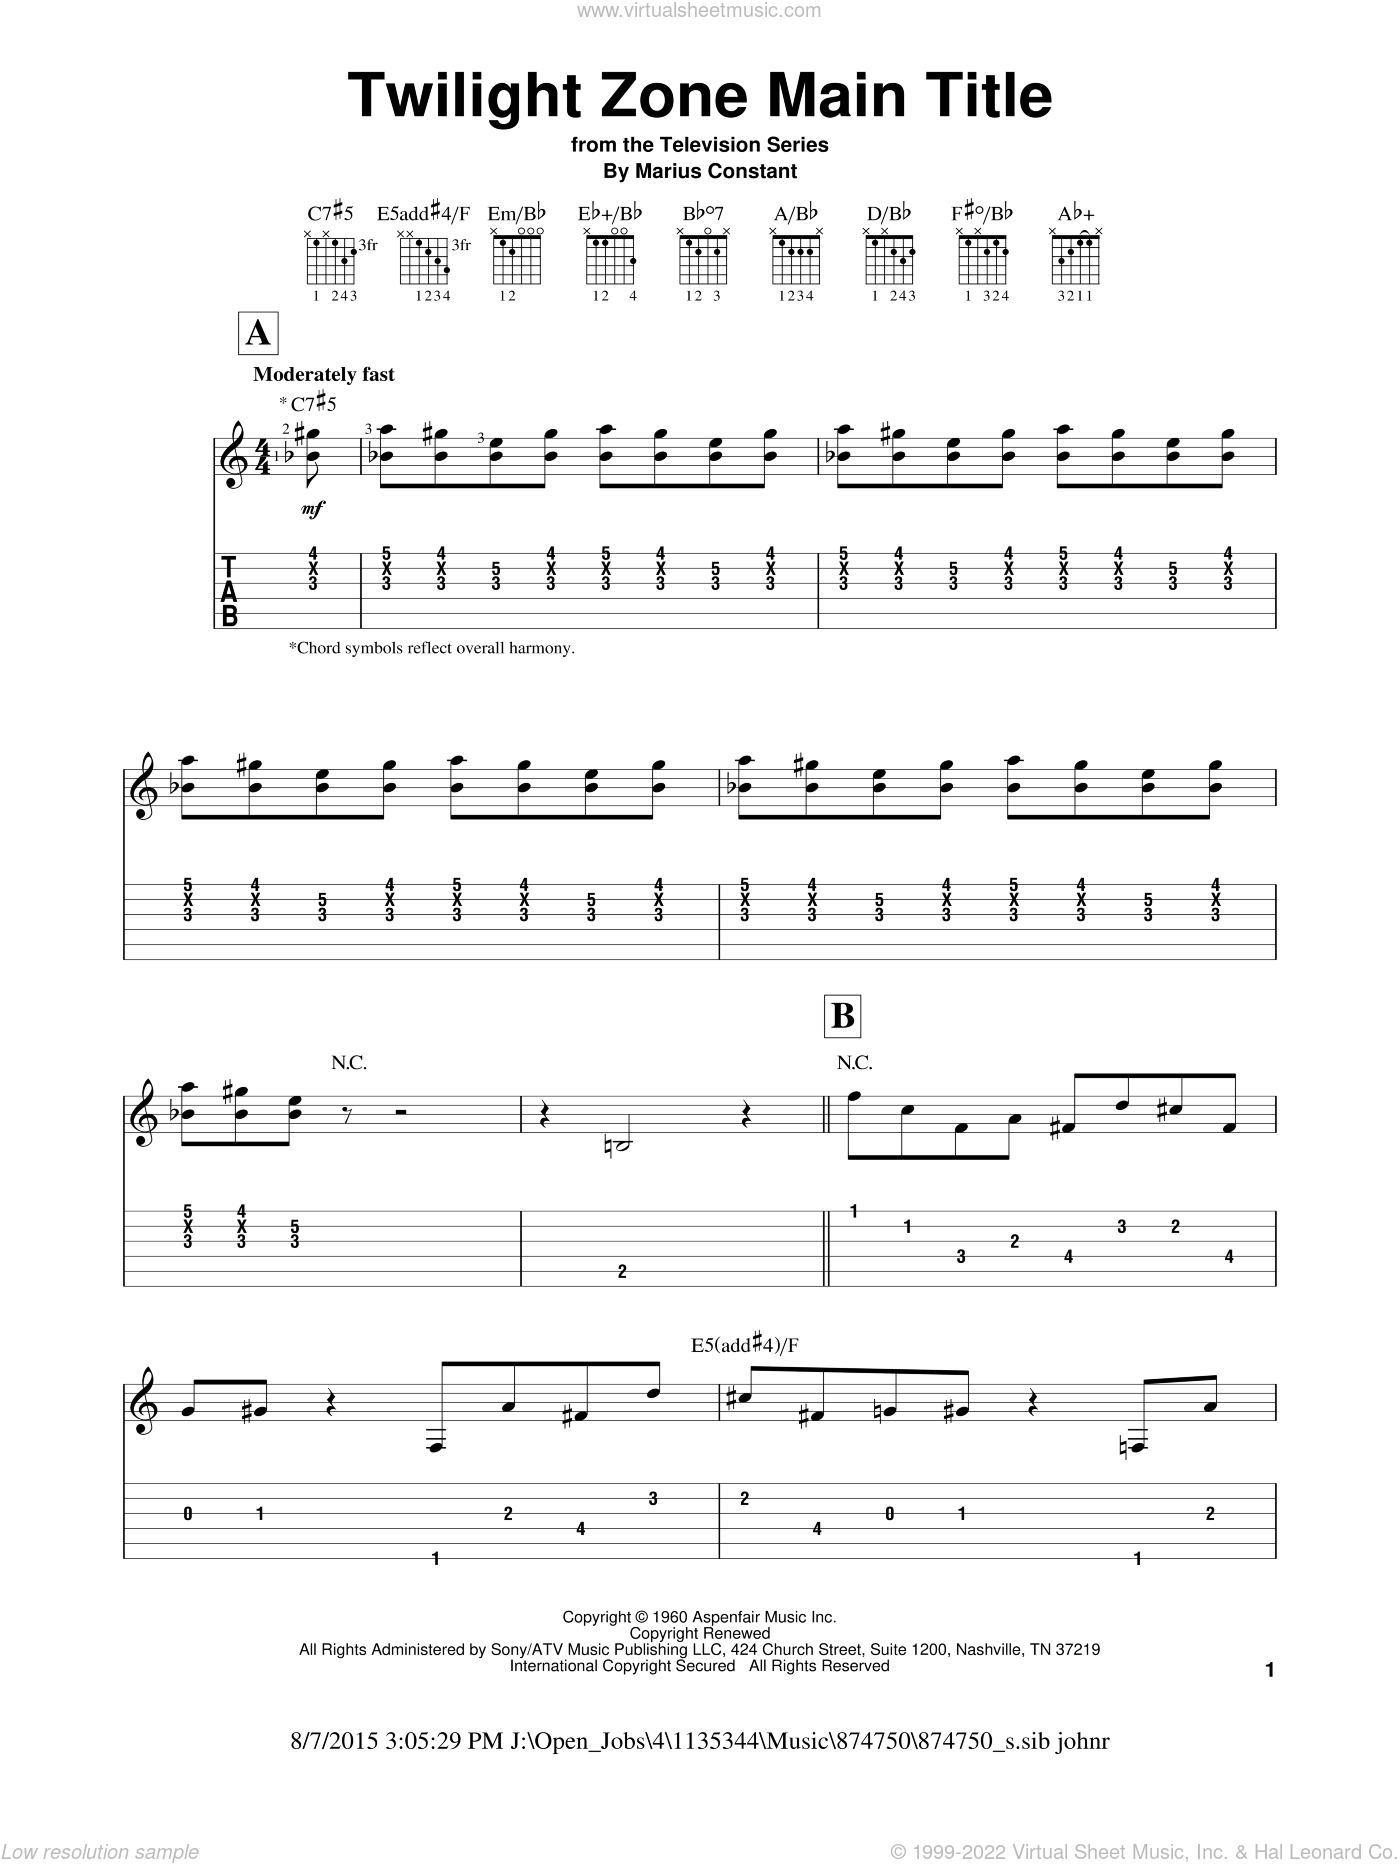 Constant - Twilight Zone Main Title sheet music for guitar solo (easy